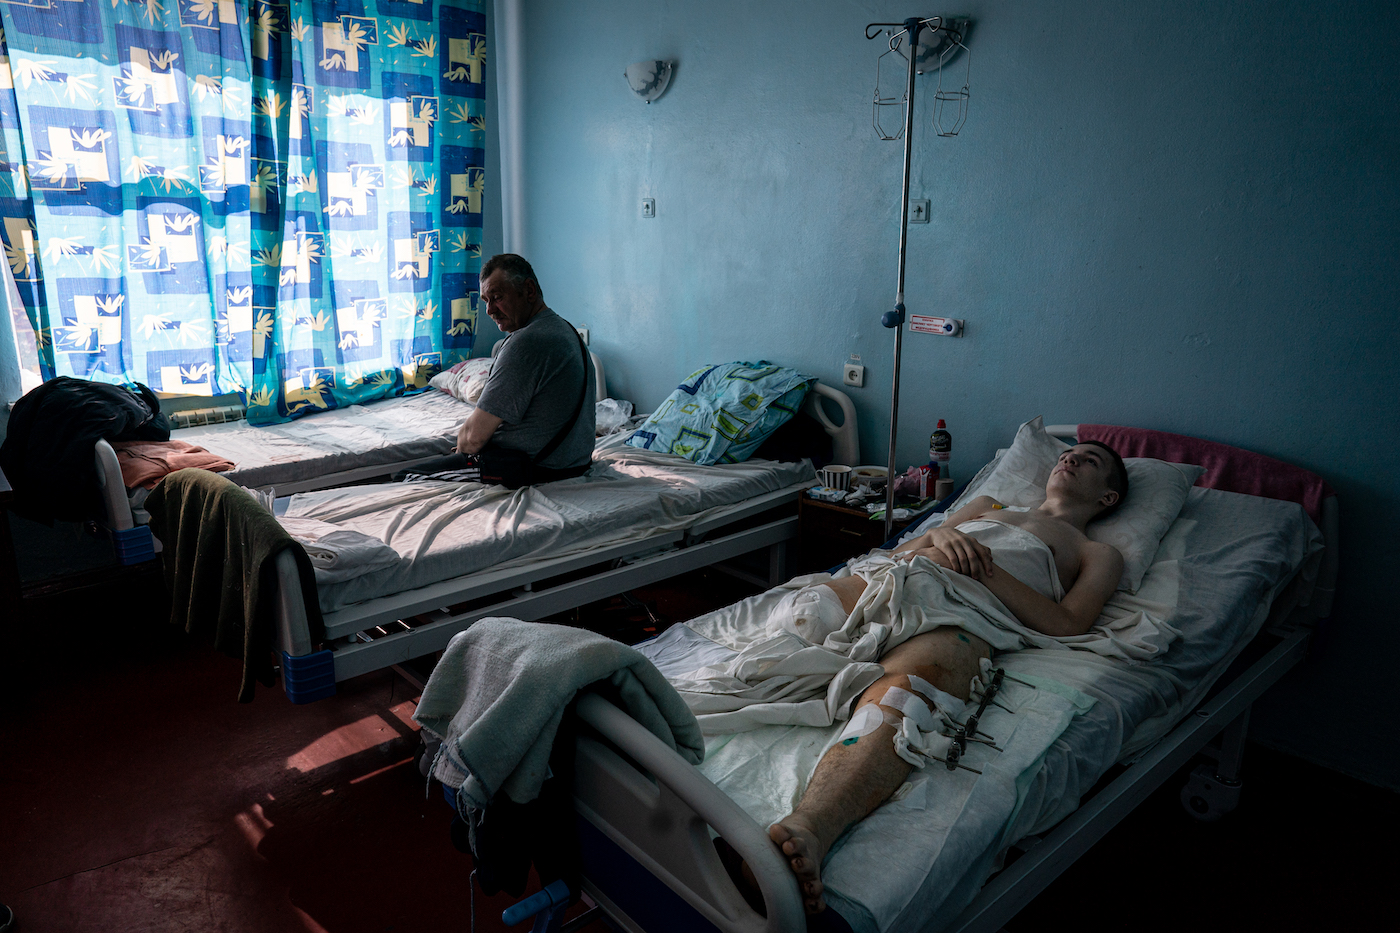 Sasha, 16, is seen laying in a hospital bed after having his leg amputated following an injury from Russian shelling. Prior to the war Sasha’s passion was dancing. Kharkiv, Ukraine on March 11, 2022 Wolfgang Schwan - Anadolu Agency